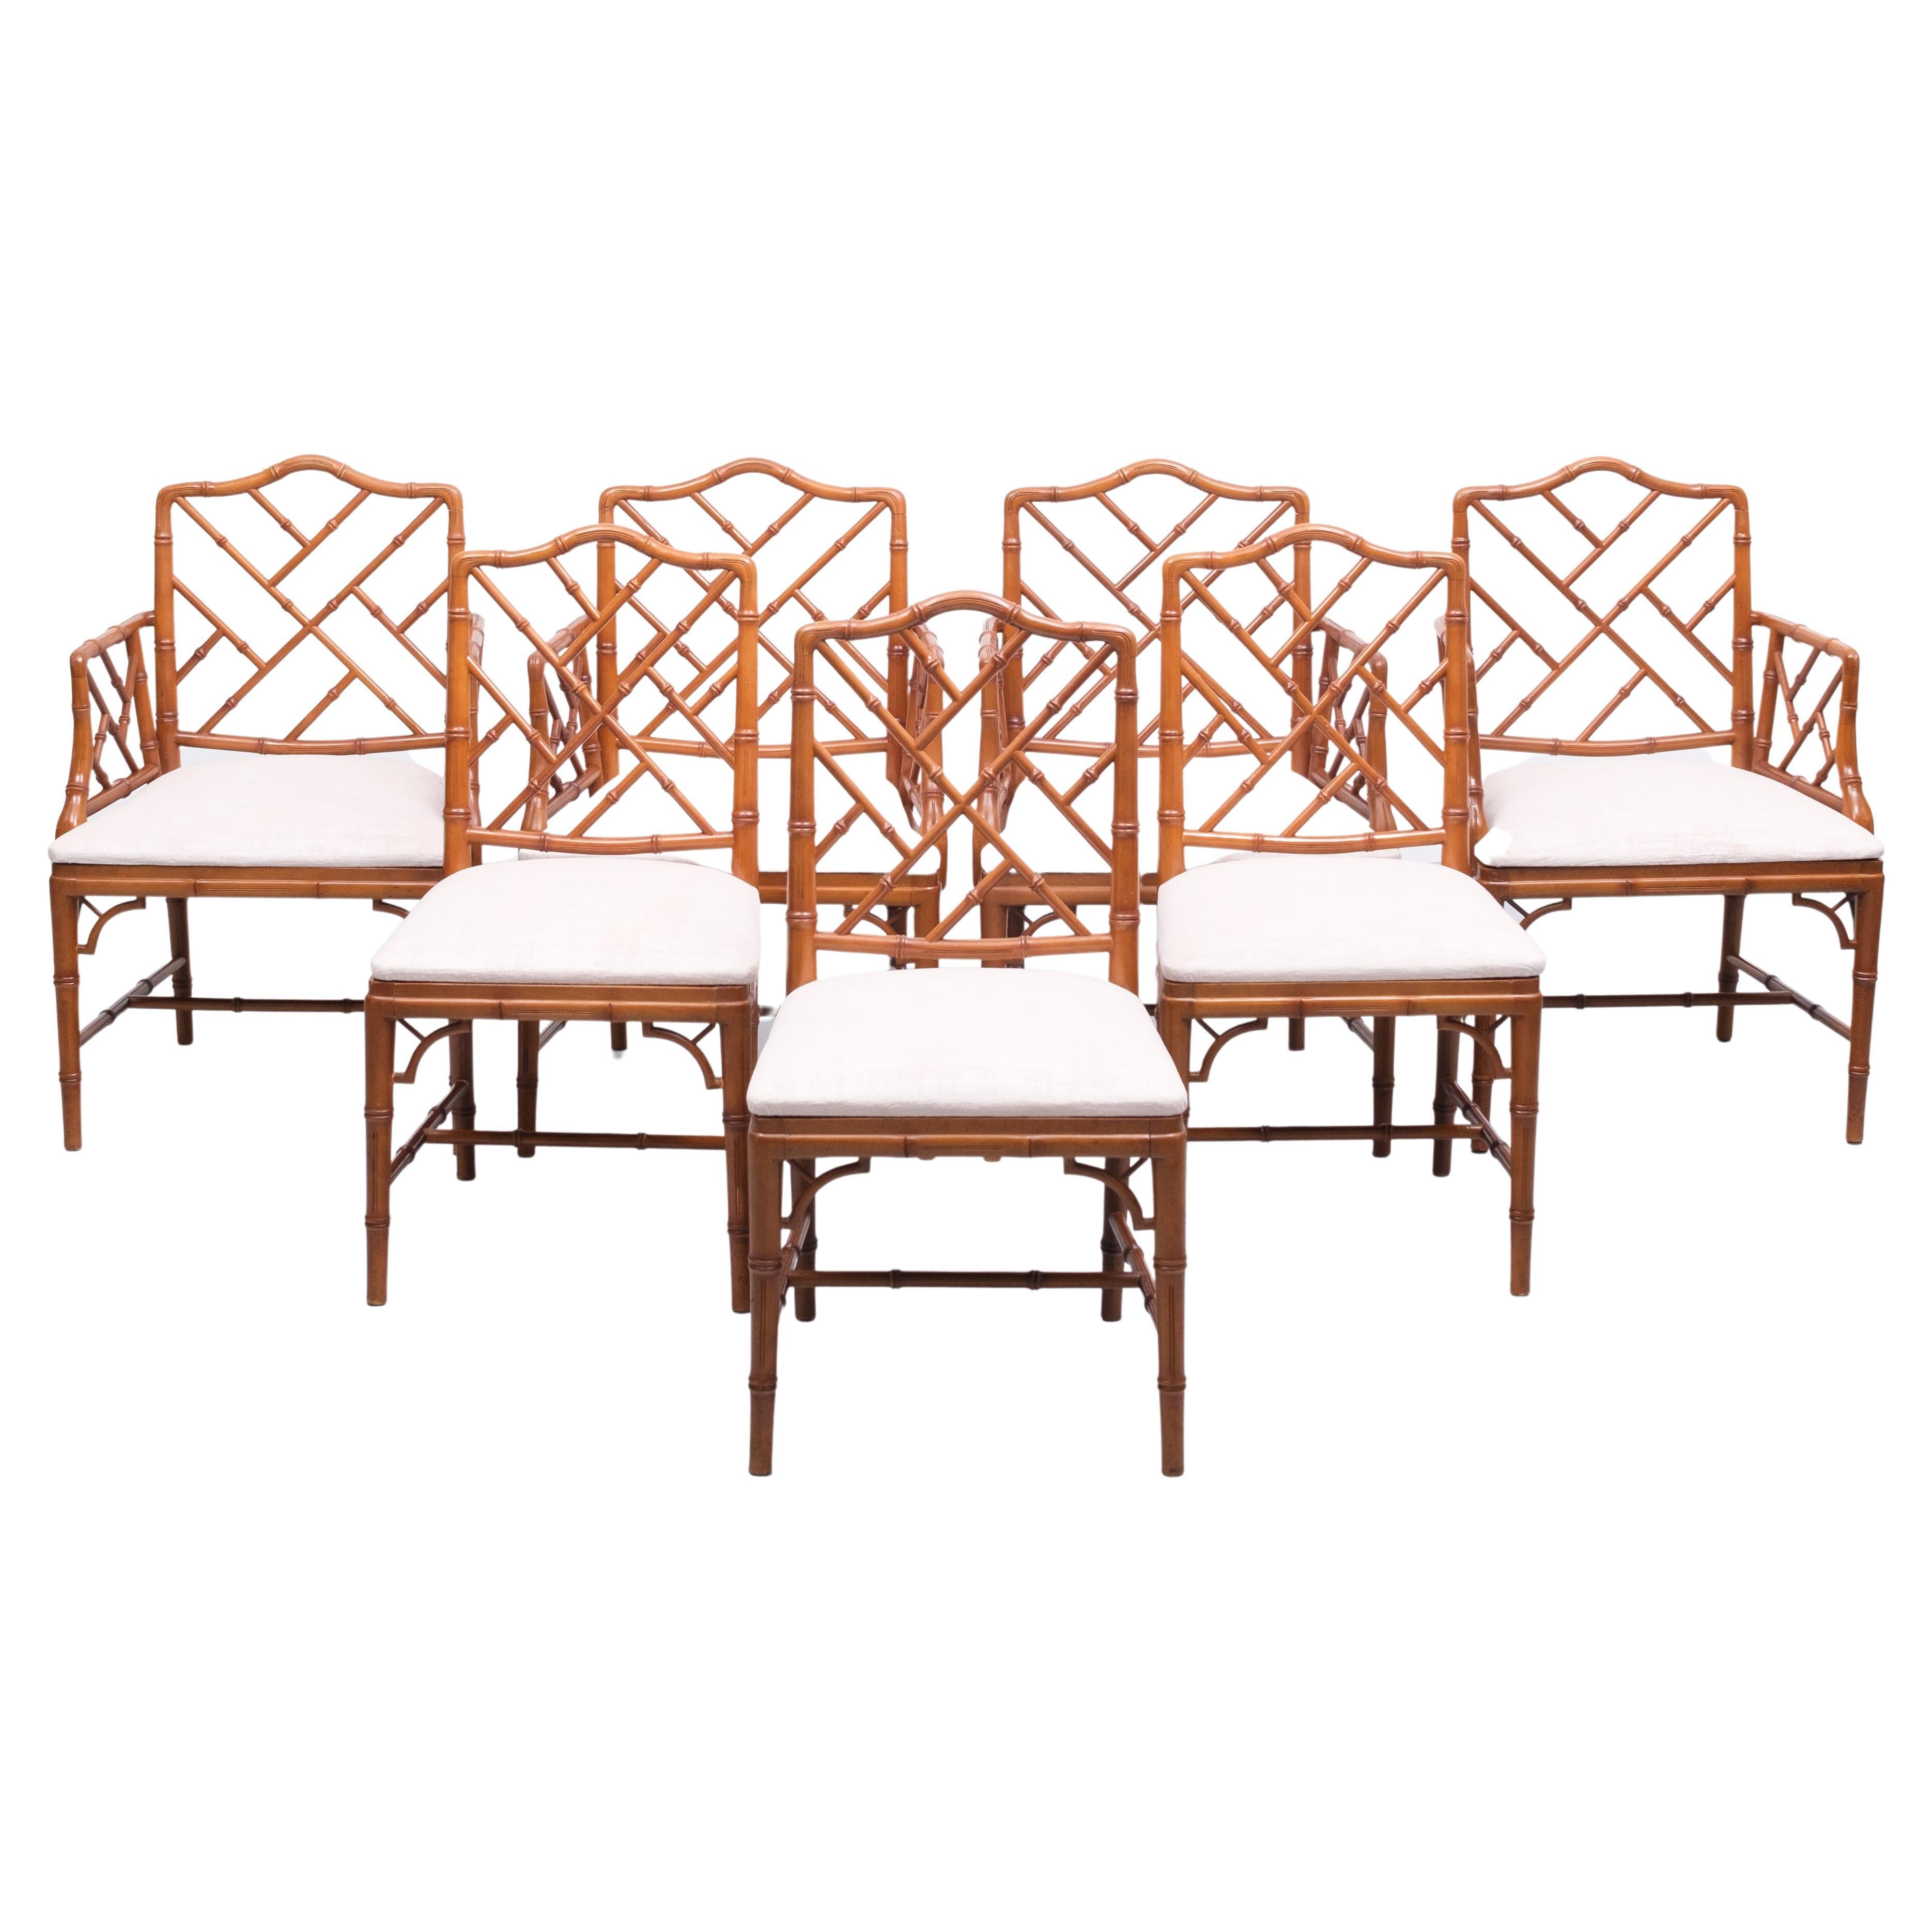 Late 20th Century 20th Century Chinese Chippendale Style Faux Bamboo Chairs